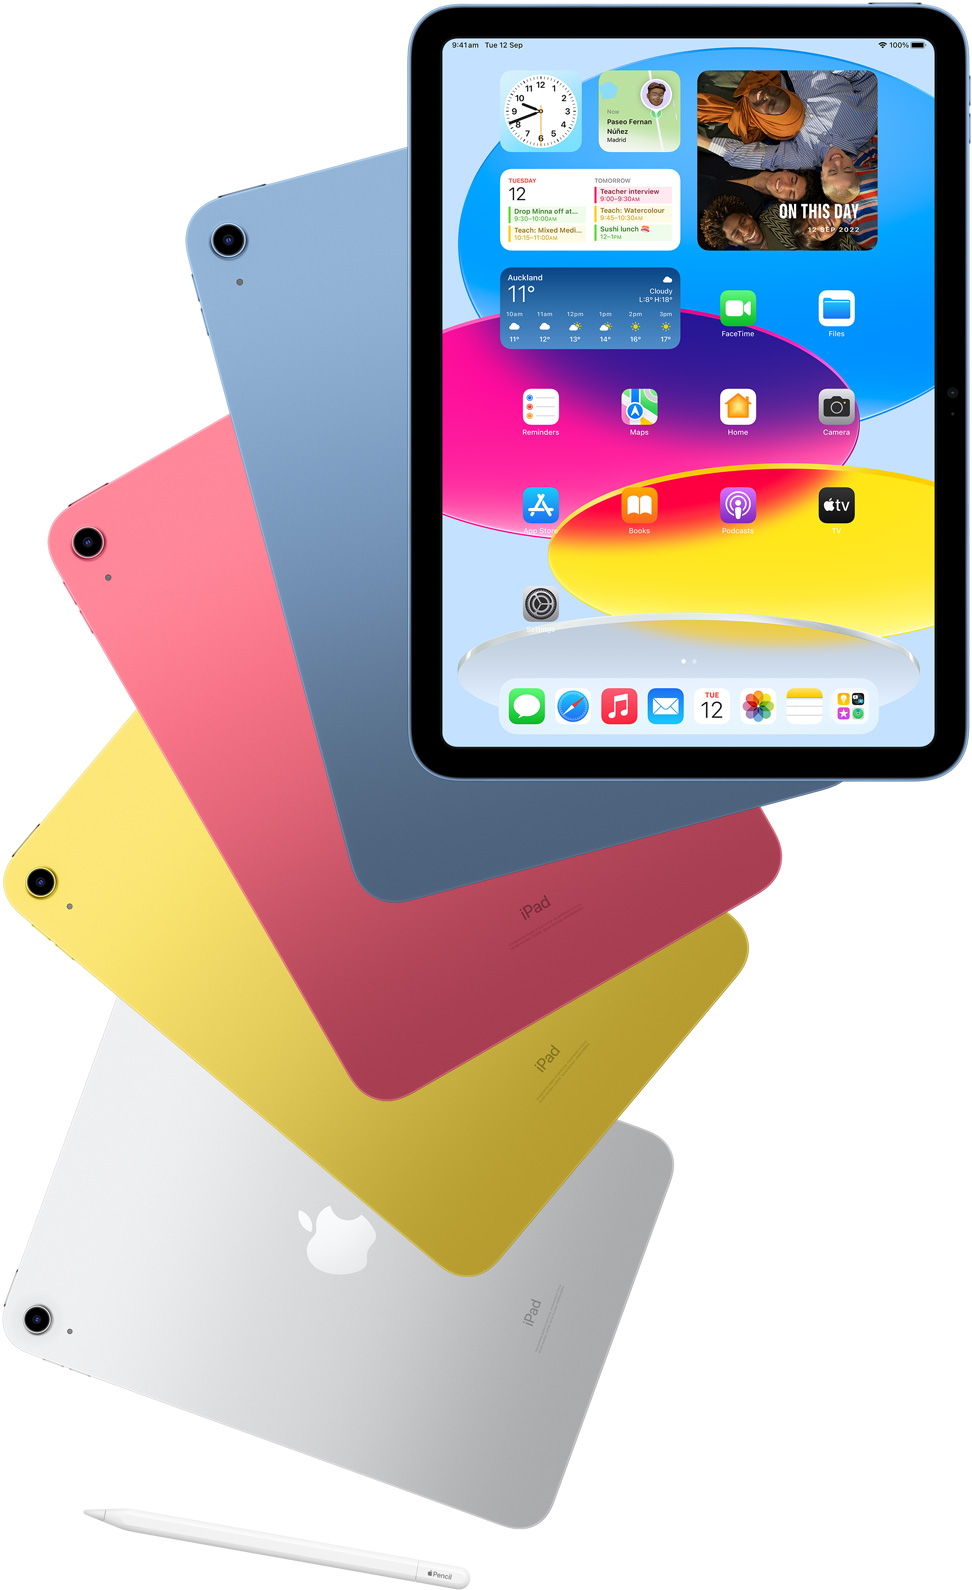 Front view of iPad shows Home Screen, with Blue, Pink, Yellow and Silver rear-facing iPad devices behind it. An Apple Pencil sits near the arranged iPad models.